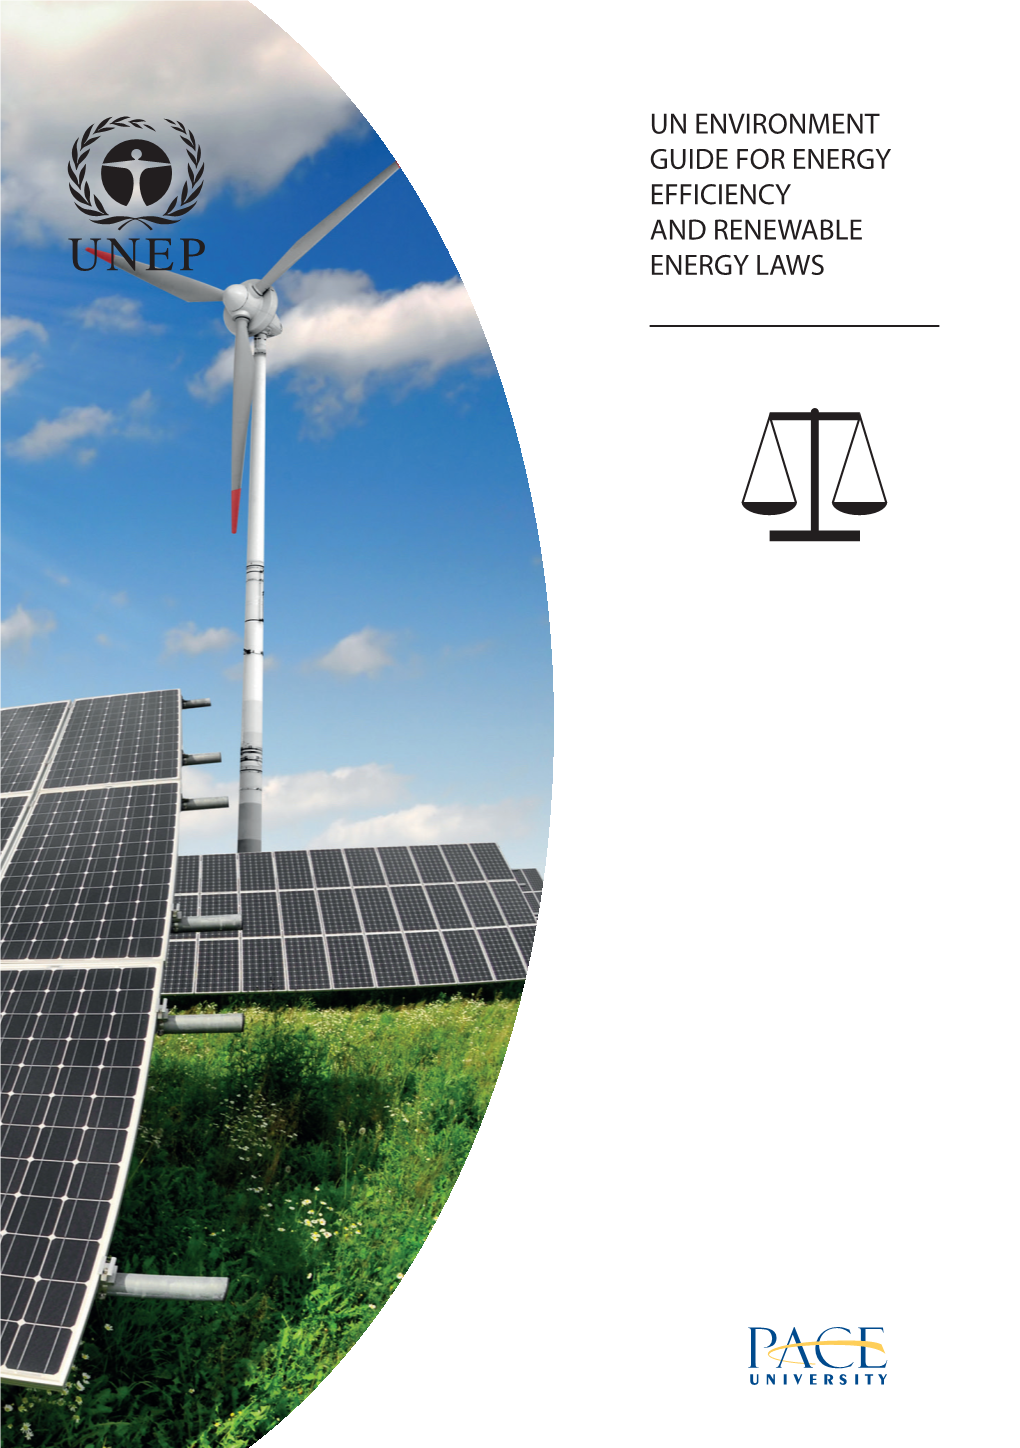 Un Environment Guide for Energy Efficiency and Renewable Energy Laws- Efficiency and Renewable Energy Laws